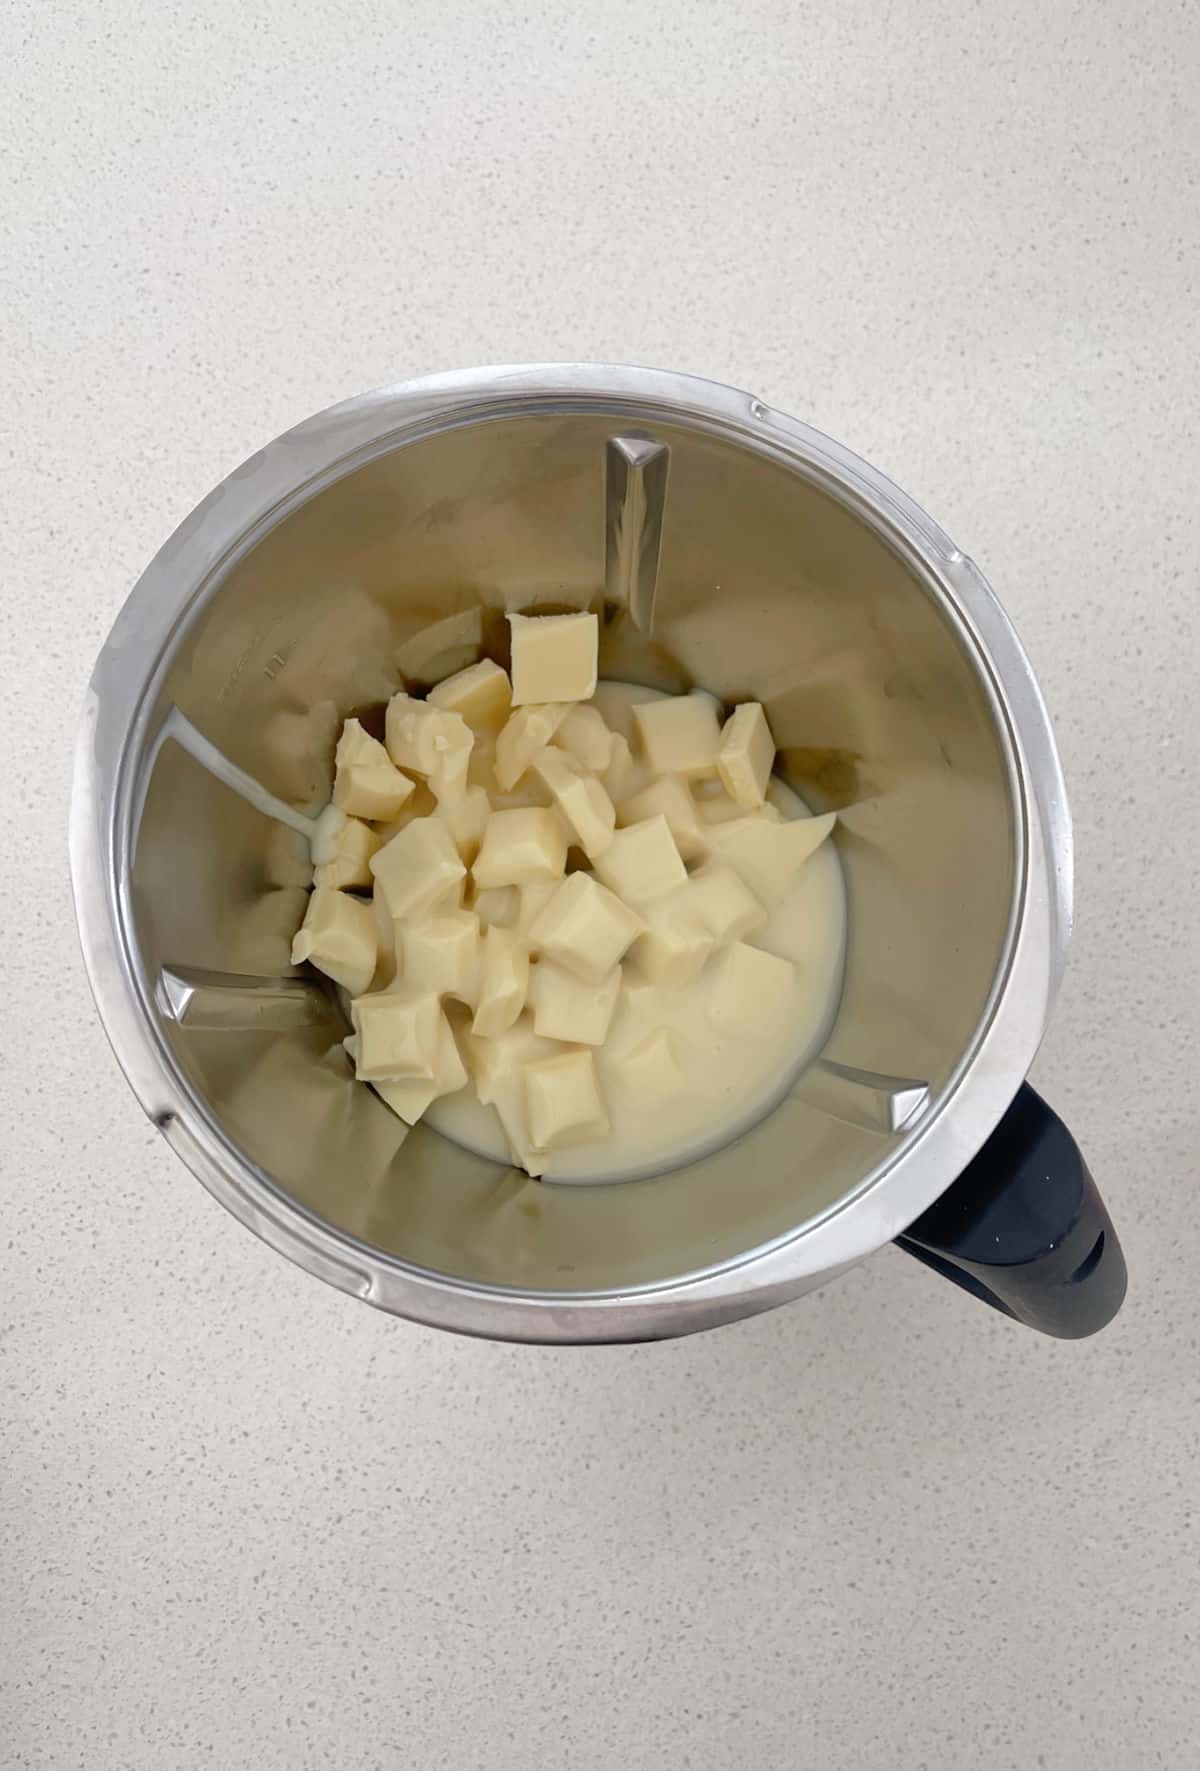 White chocolate and sweetened condensed milk in a thermomix bowl.